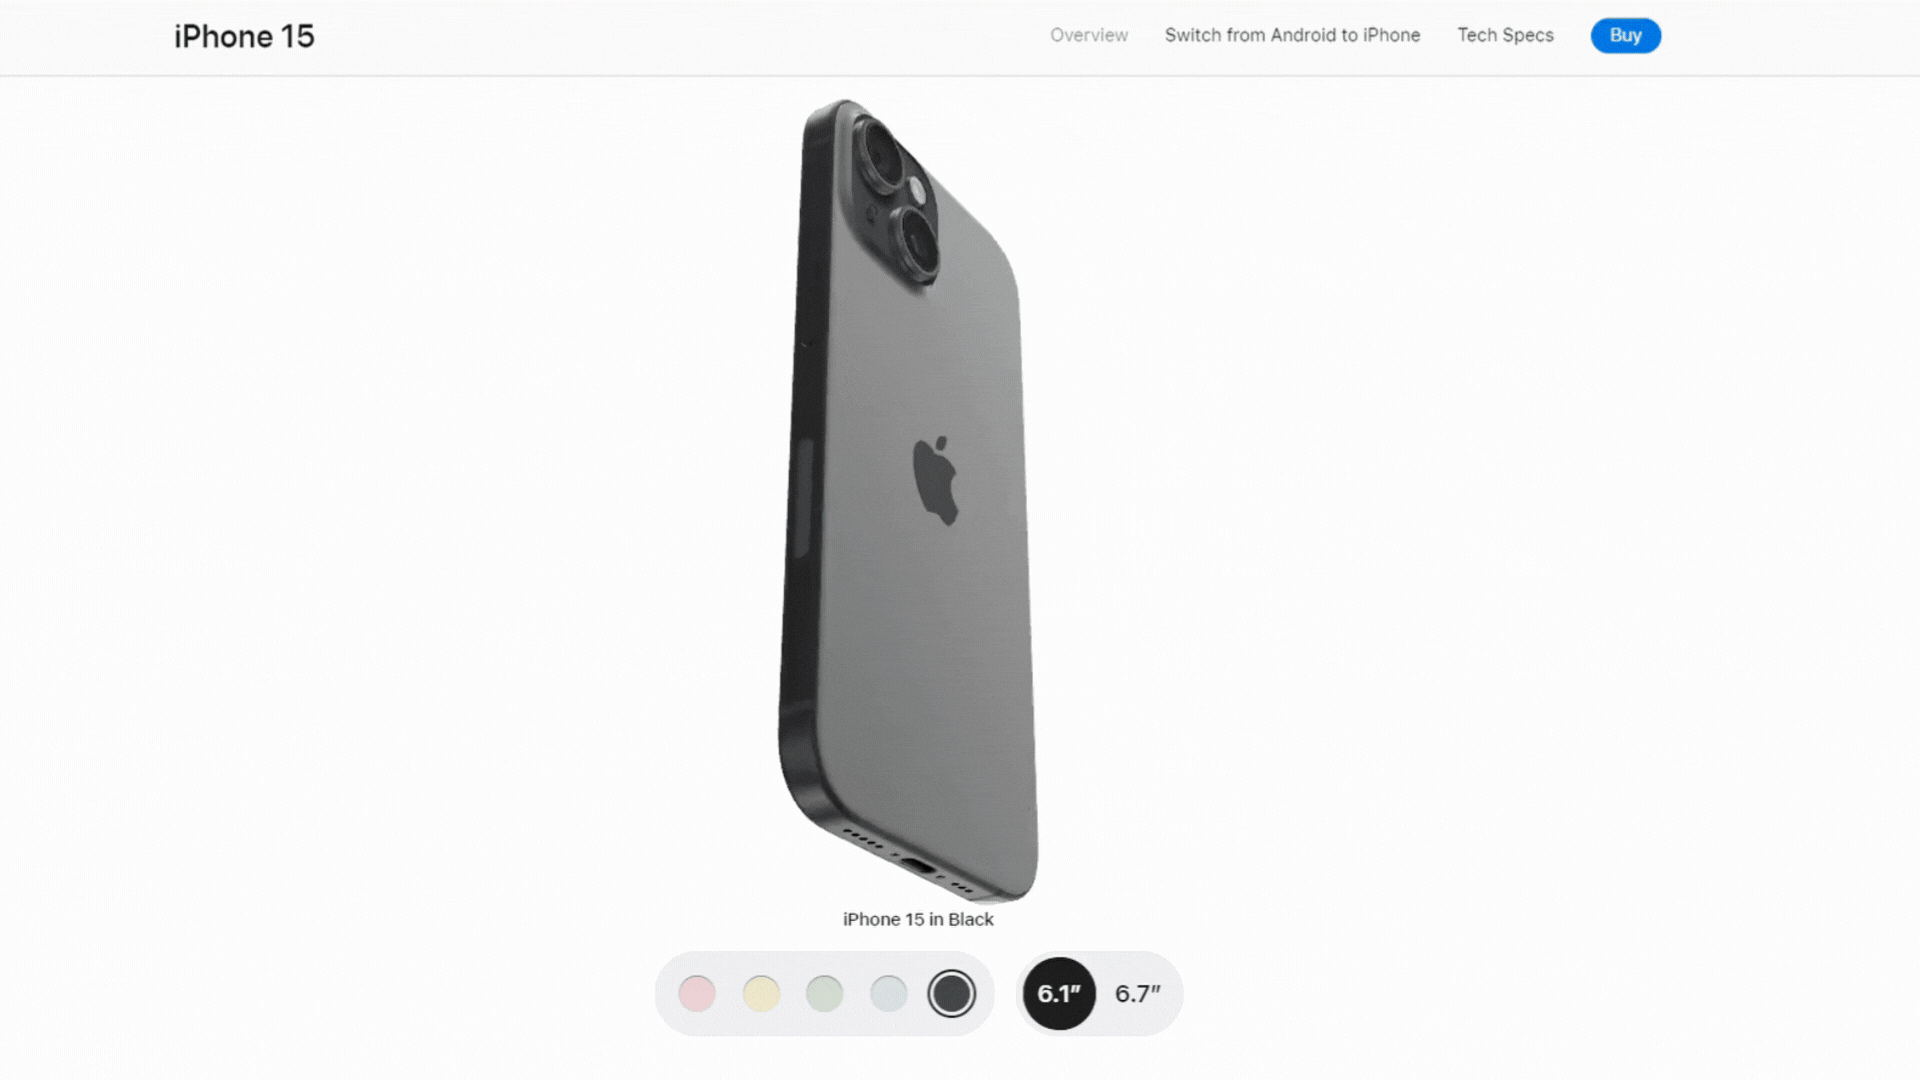 An example of 3D web design on an Apple iPhone product page.